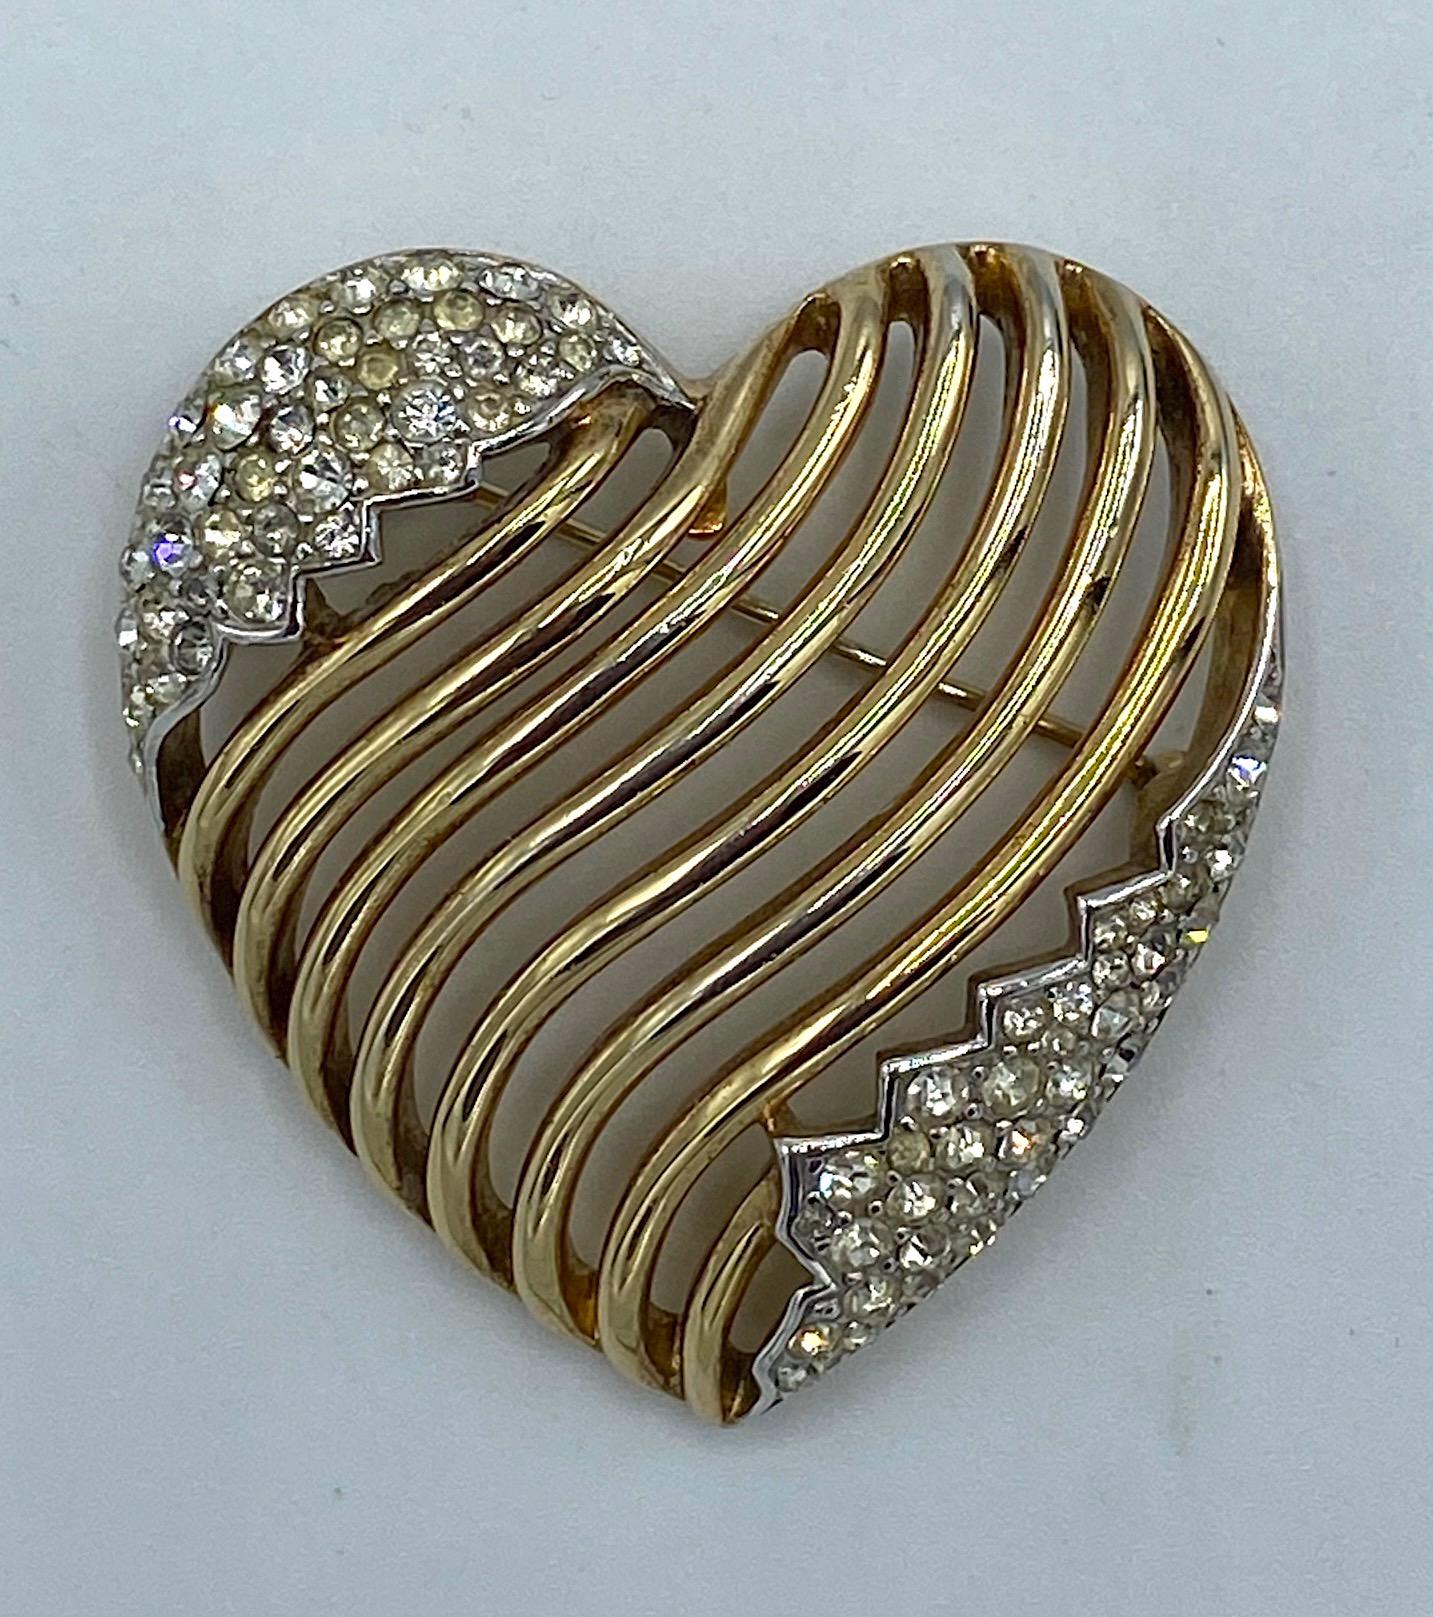 A vintage openwork gold heart pin with rhinestone accents from famed American fashion jewelry company Trifari. The design for this brooch was patented in 1953. The brooch is lightly domed with curved bars running diagonally and pave' set rhinestones